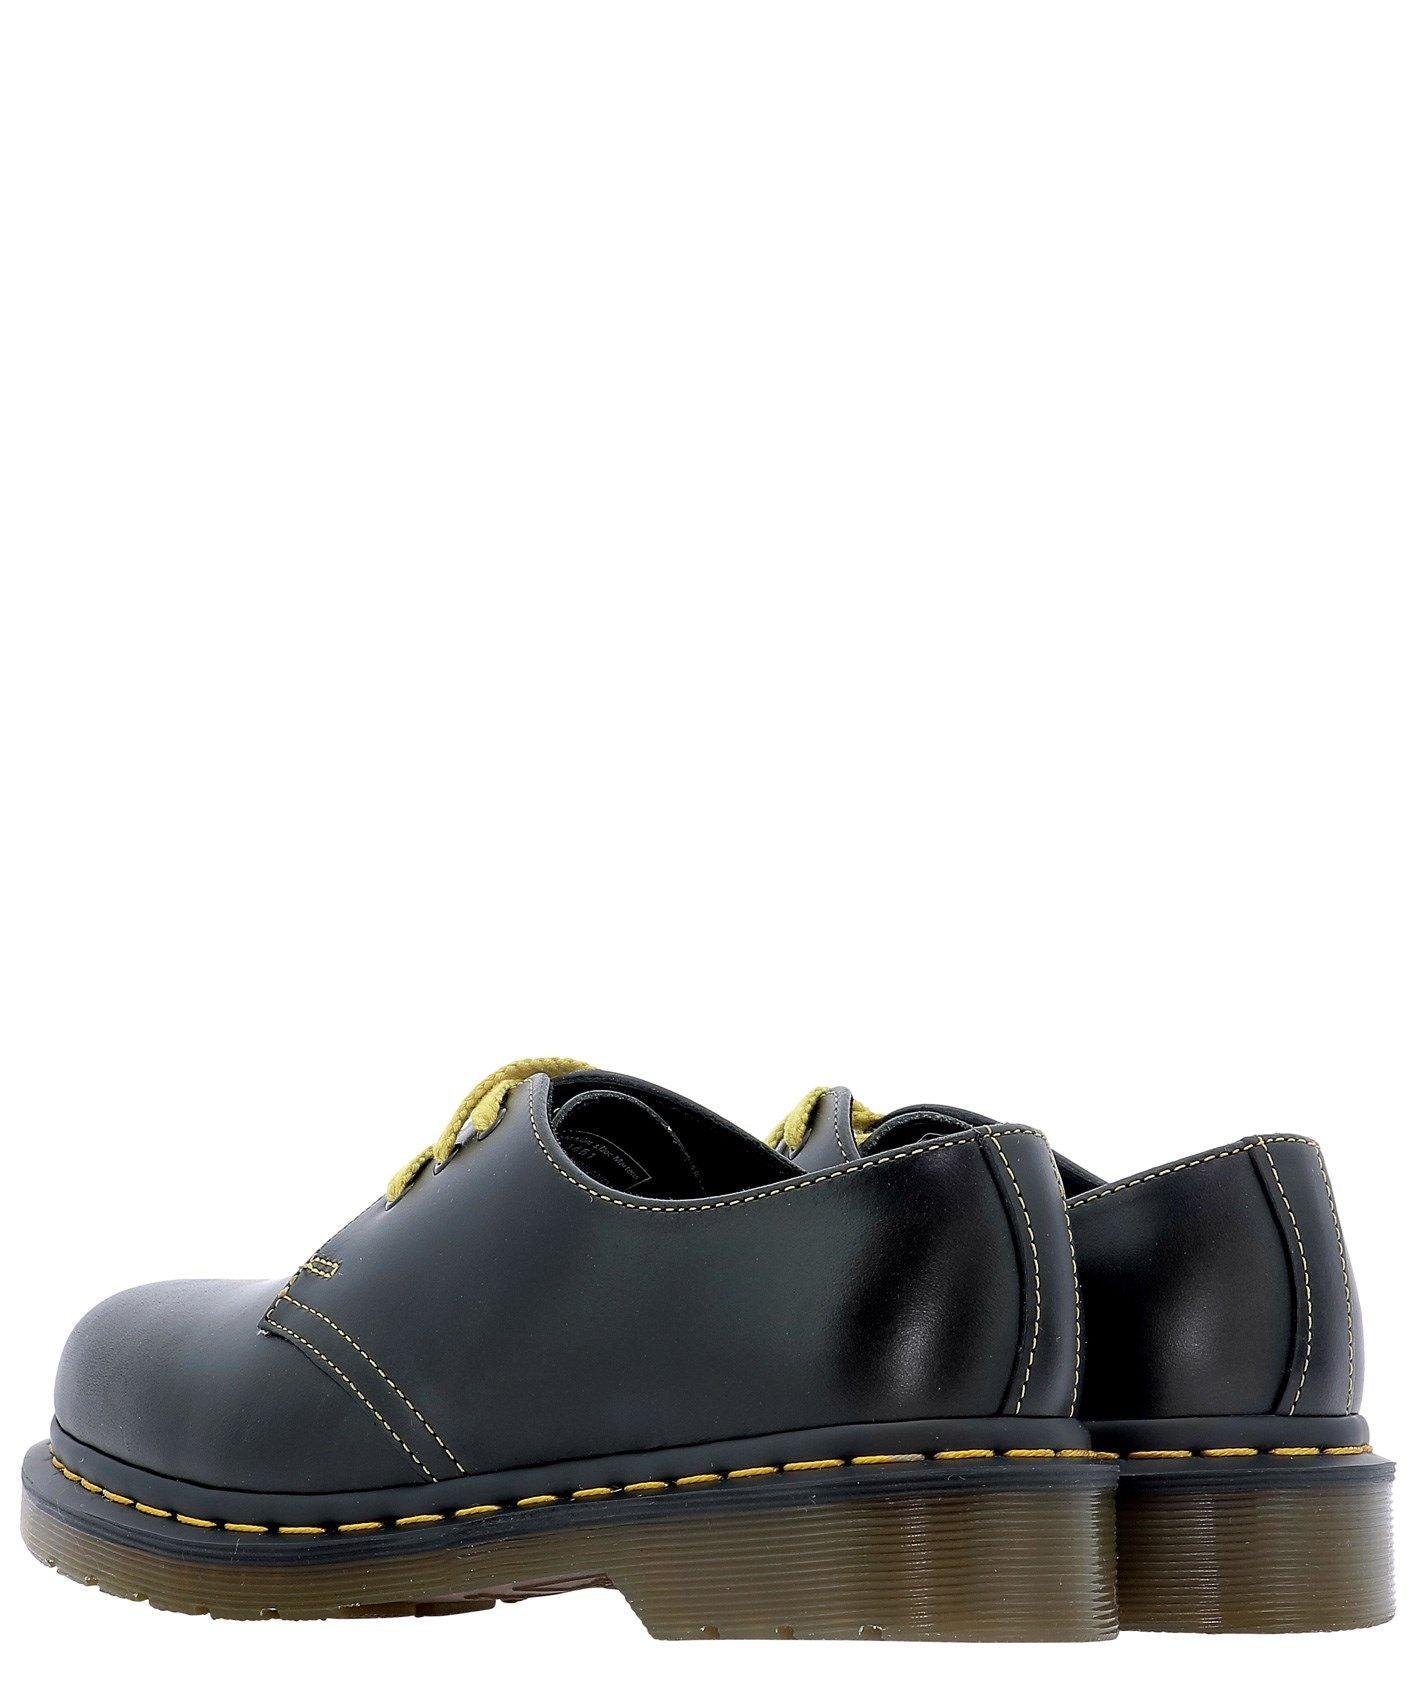 Dr. Martens Leather Unisex Adult 1461 Oxford in Black - Save 67% - Lyst